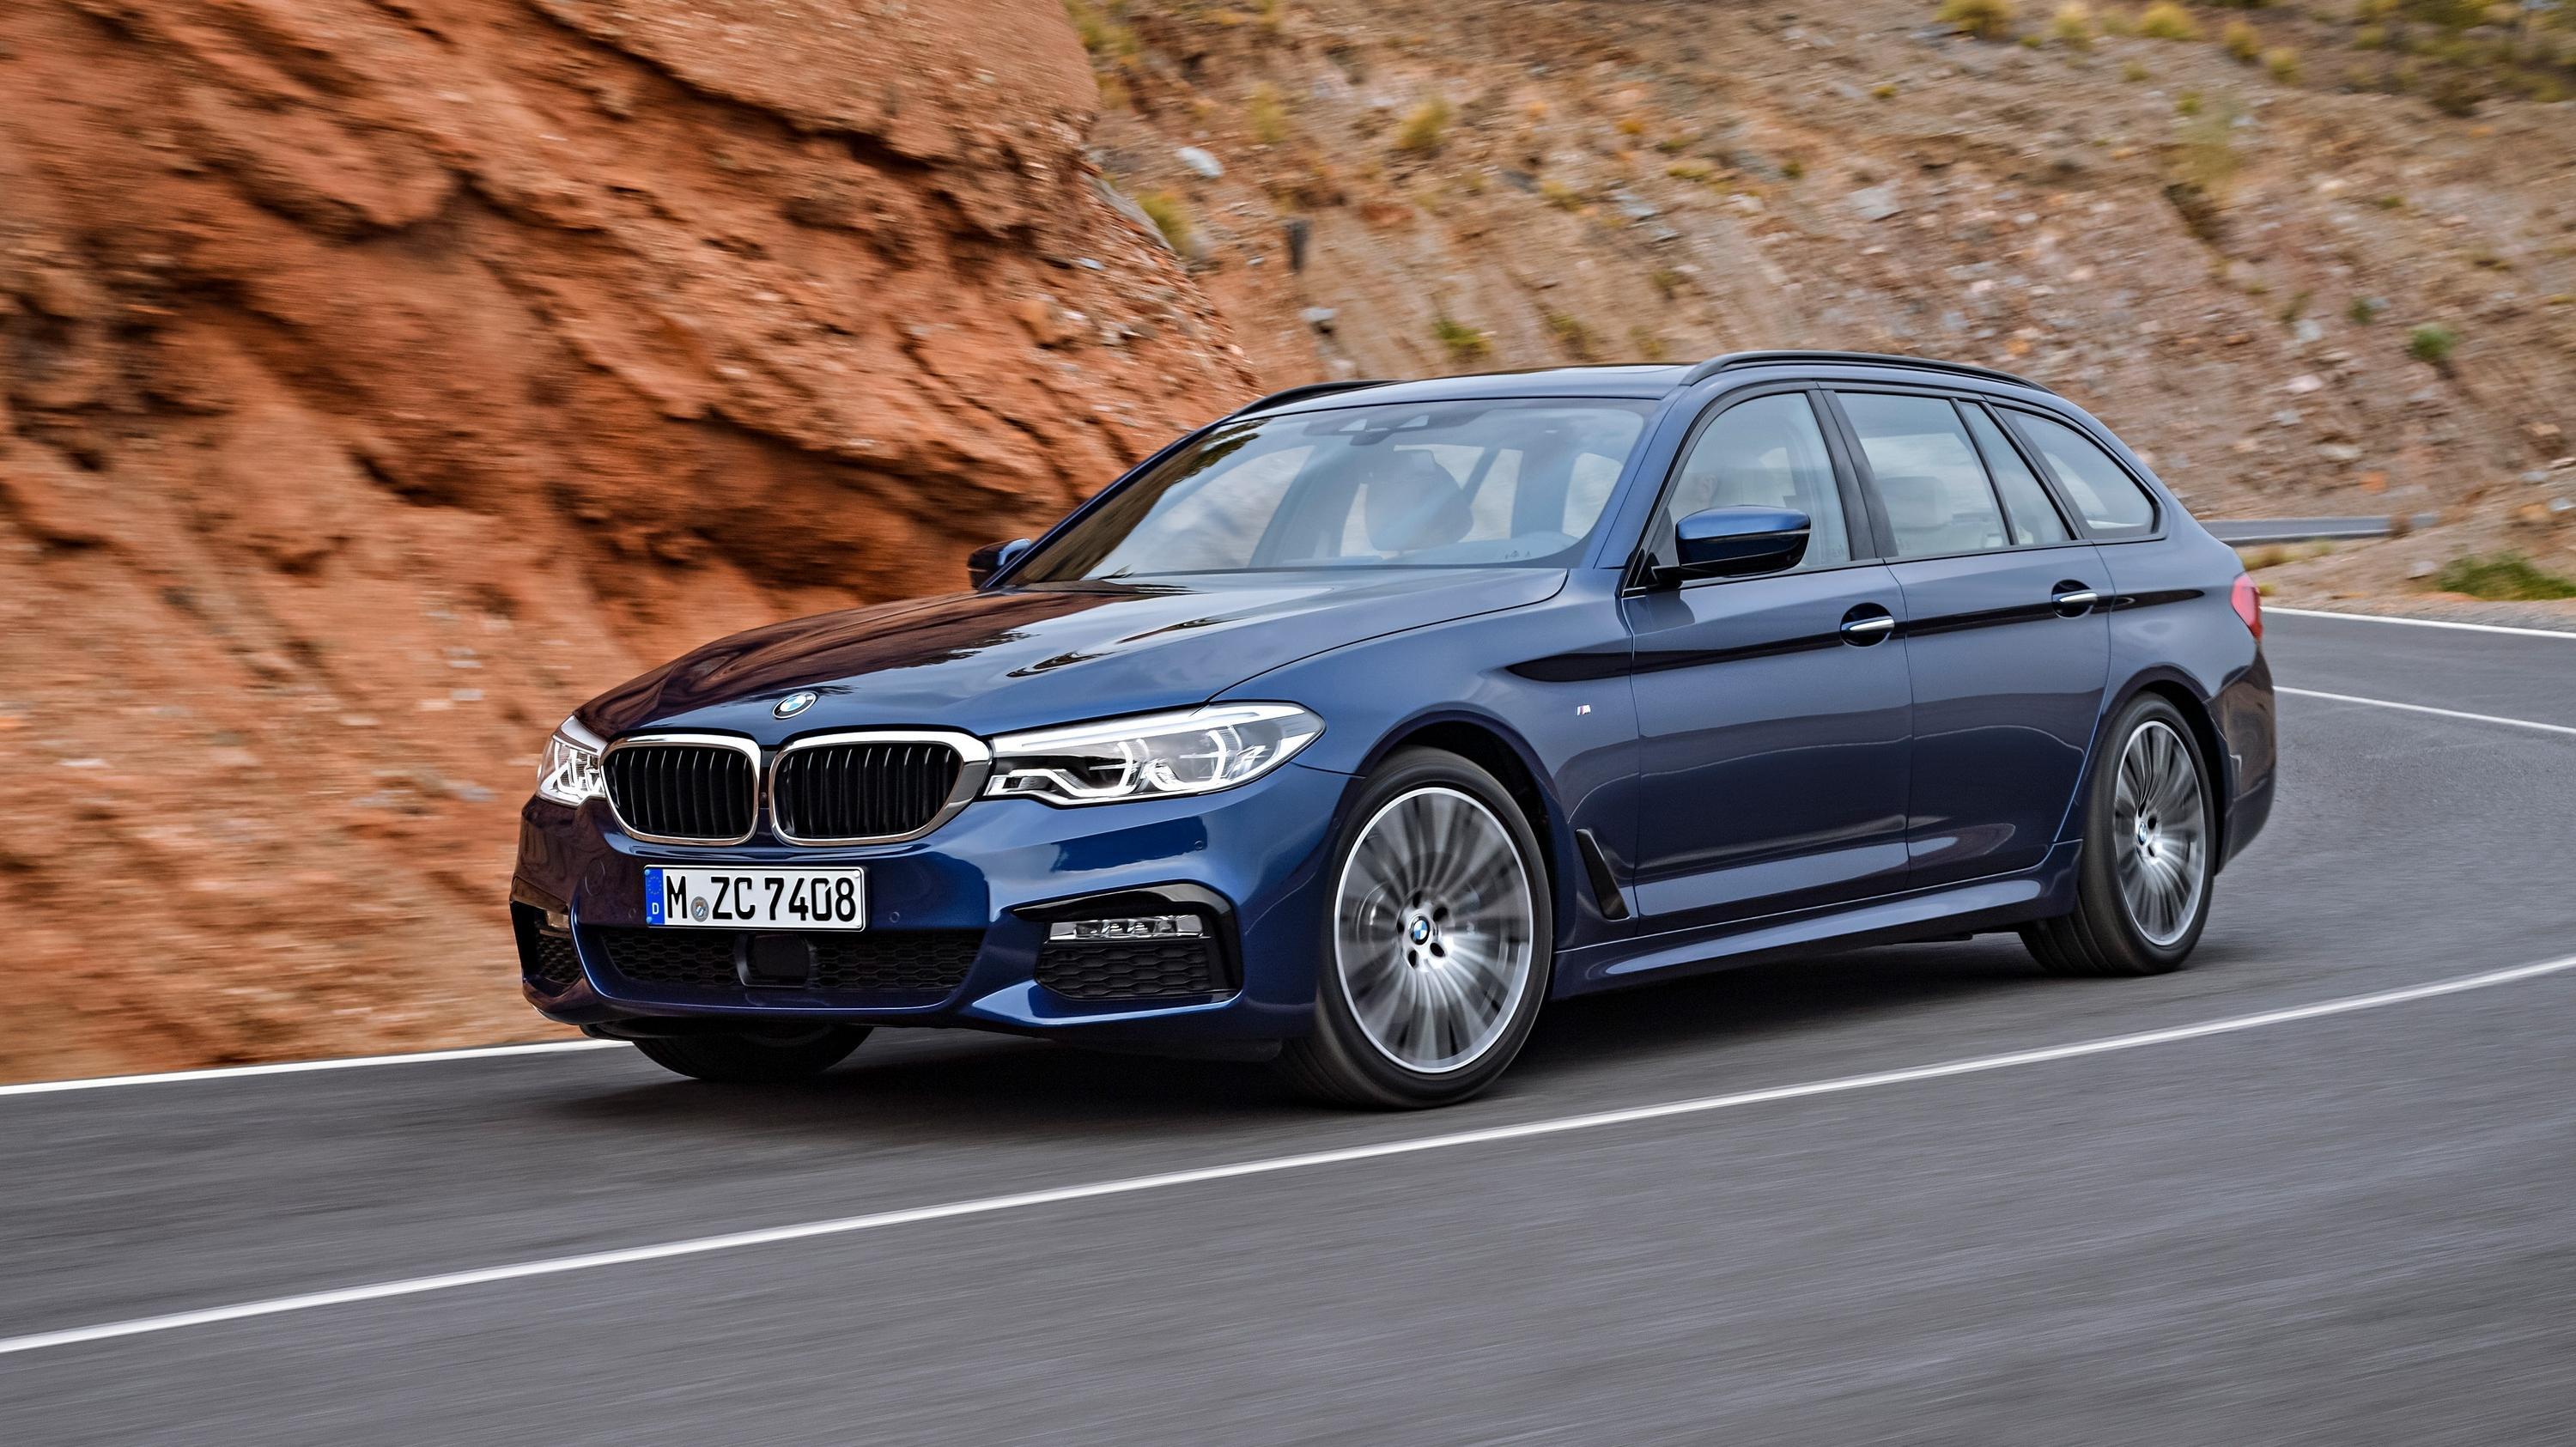 BMW 5 Series Touring Picture, Photo, Wallpaper